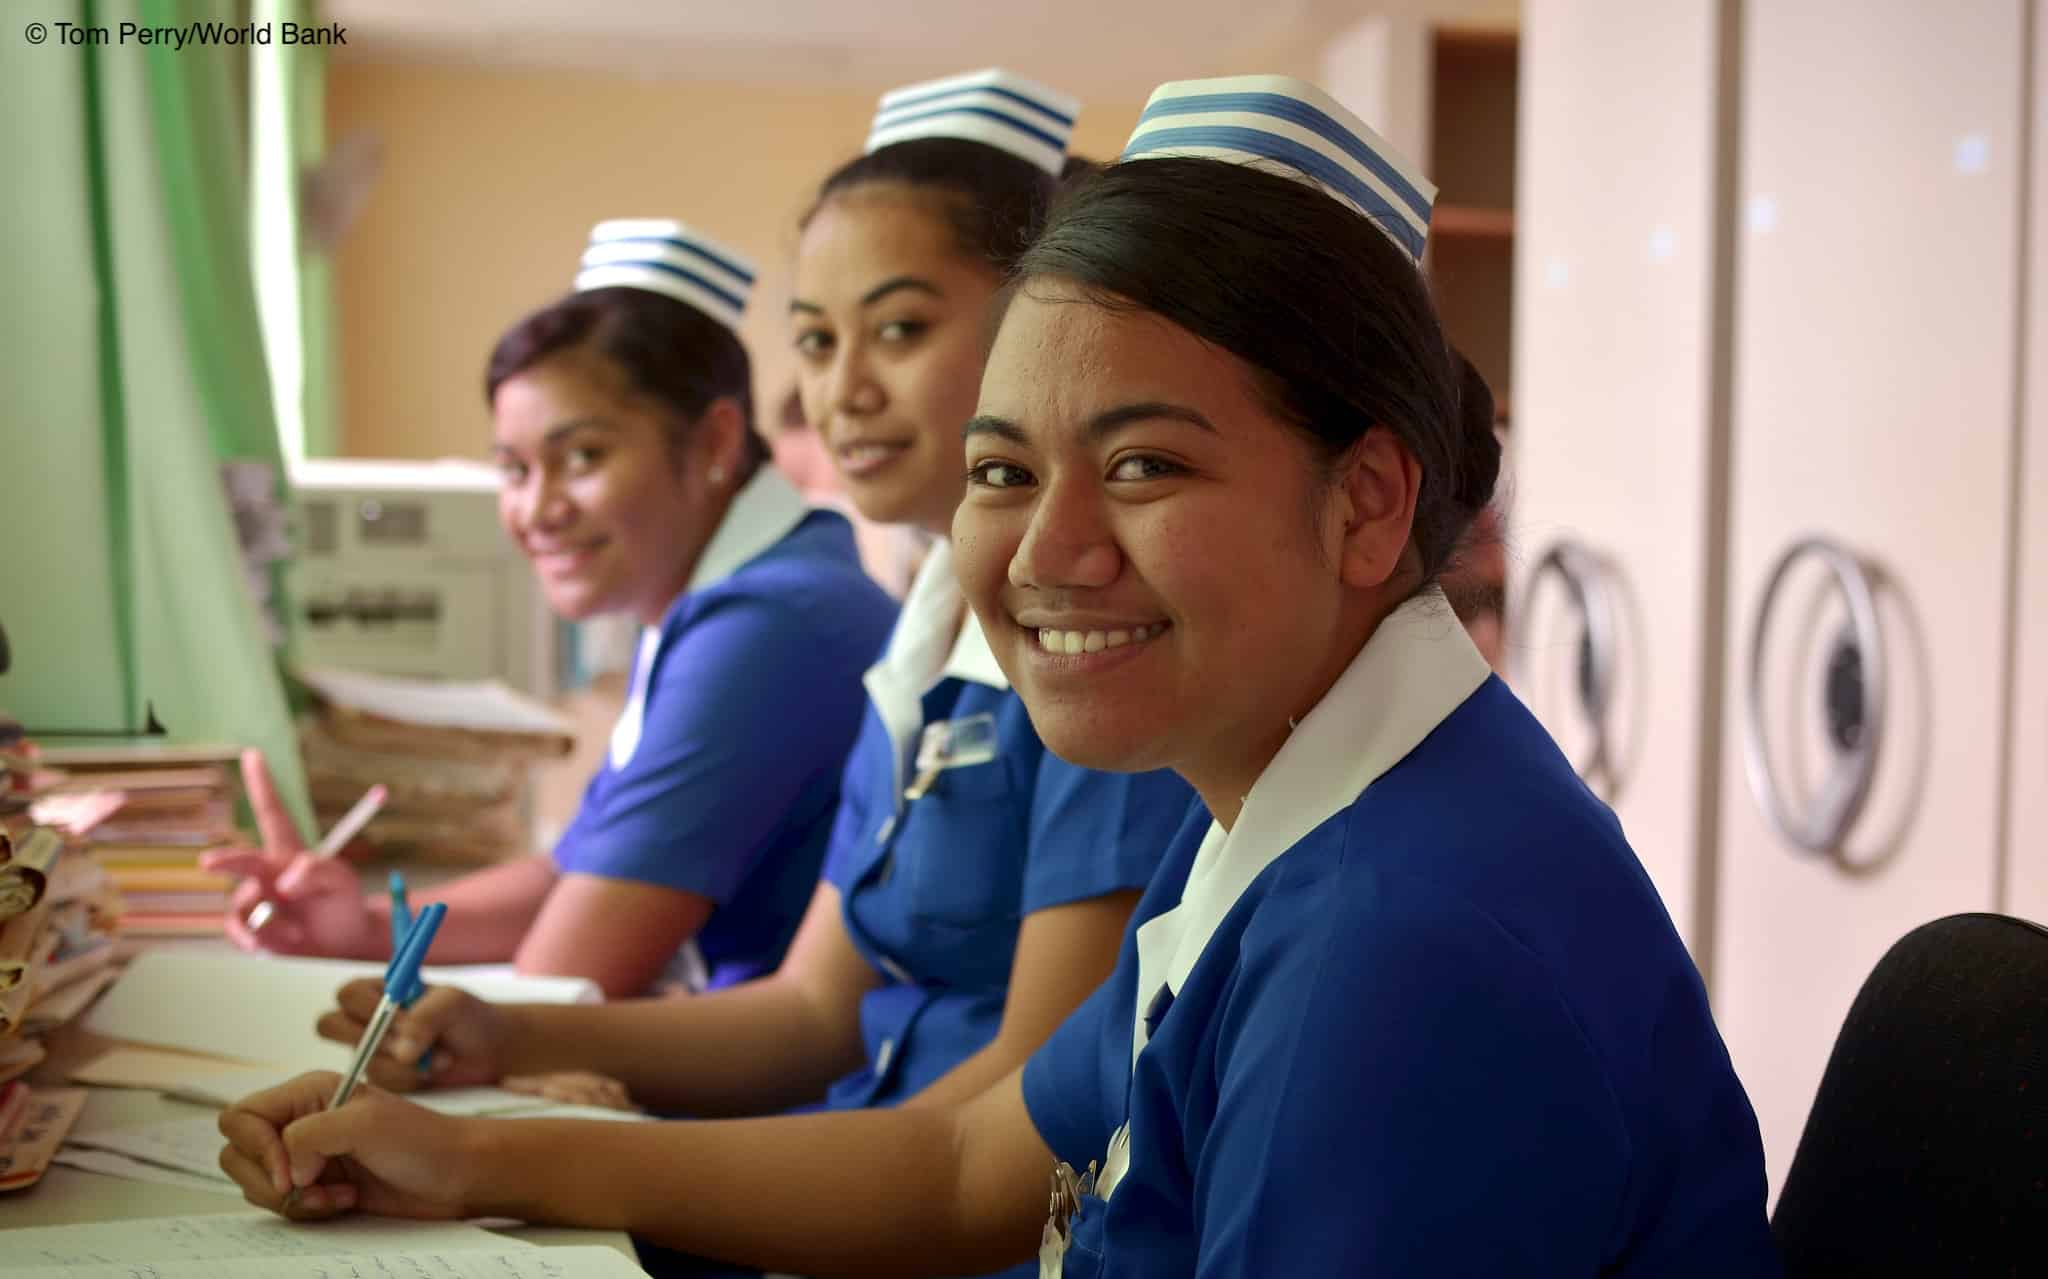 Nursing staff at Tonga's largest hospital, Vaiola Hospital. The arrival of broadband internet is set to significantly improve medical services in Tonga. Nukua'lofa, Tonga. Photo: Tom Perry / World Bank